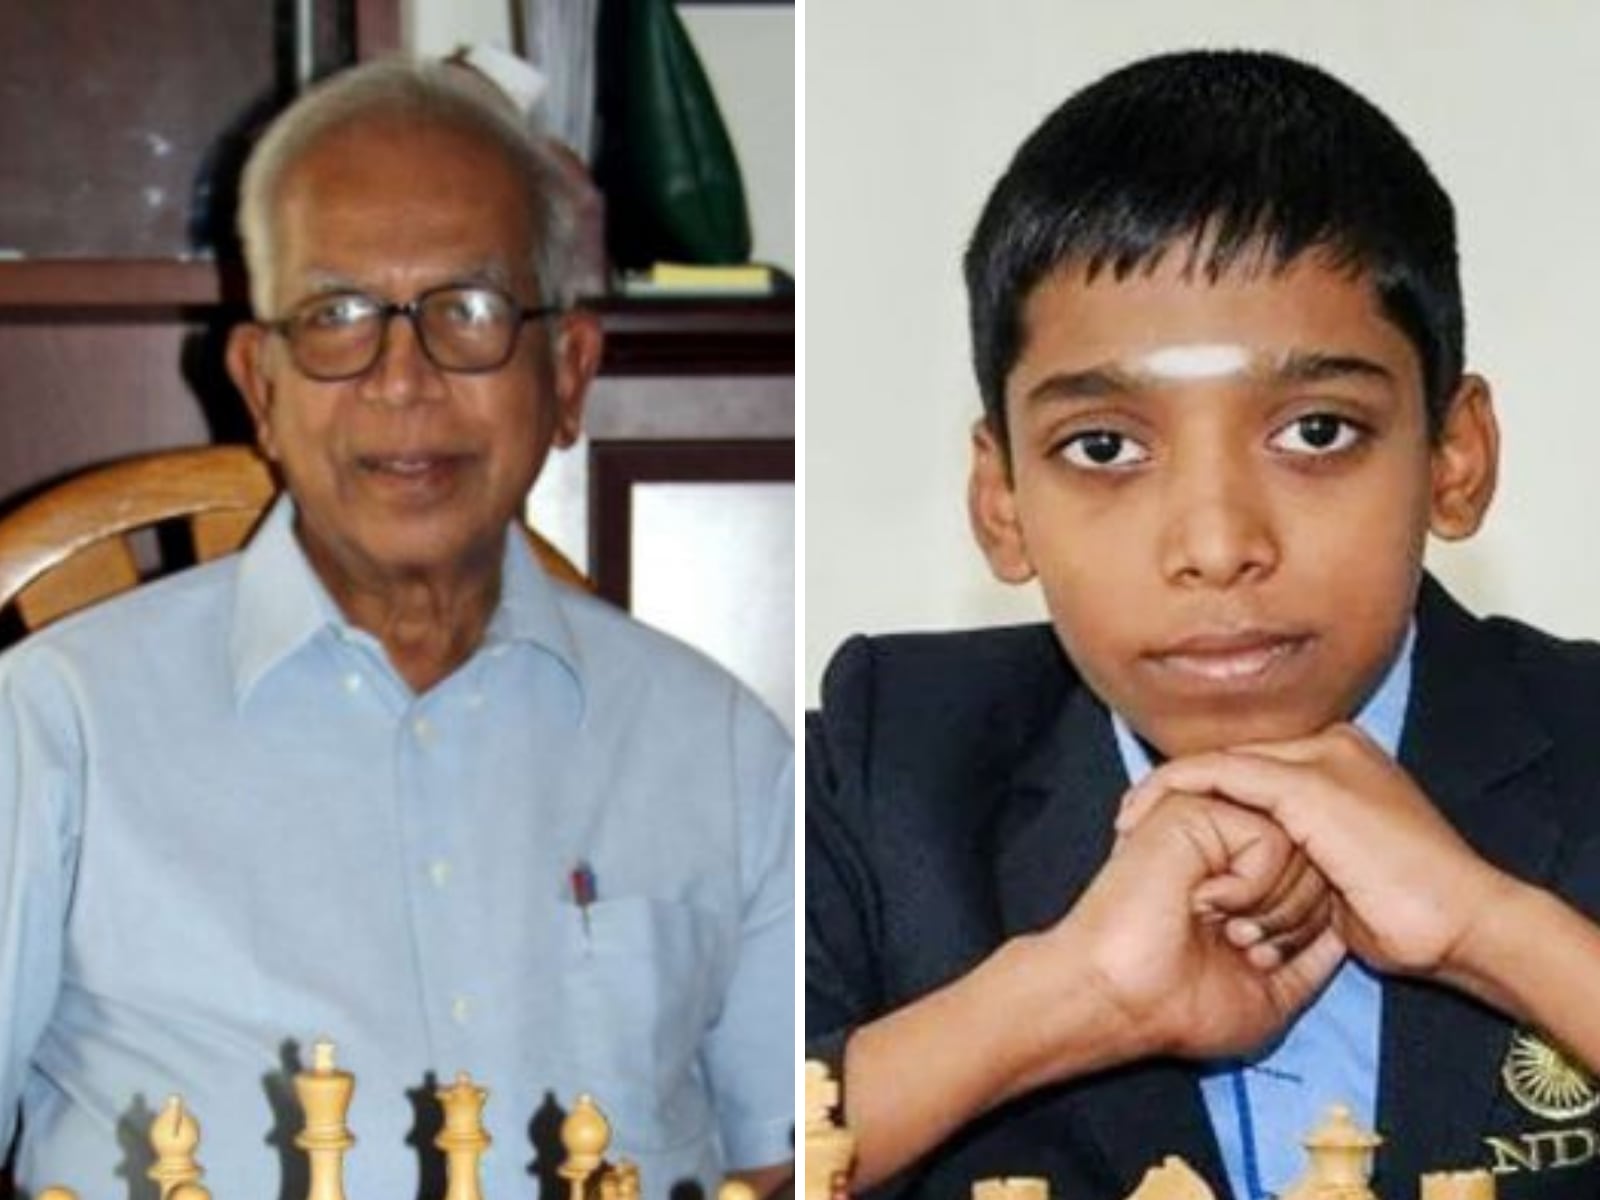 How India tripled its Grandmaster count in the past one decade